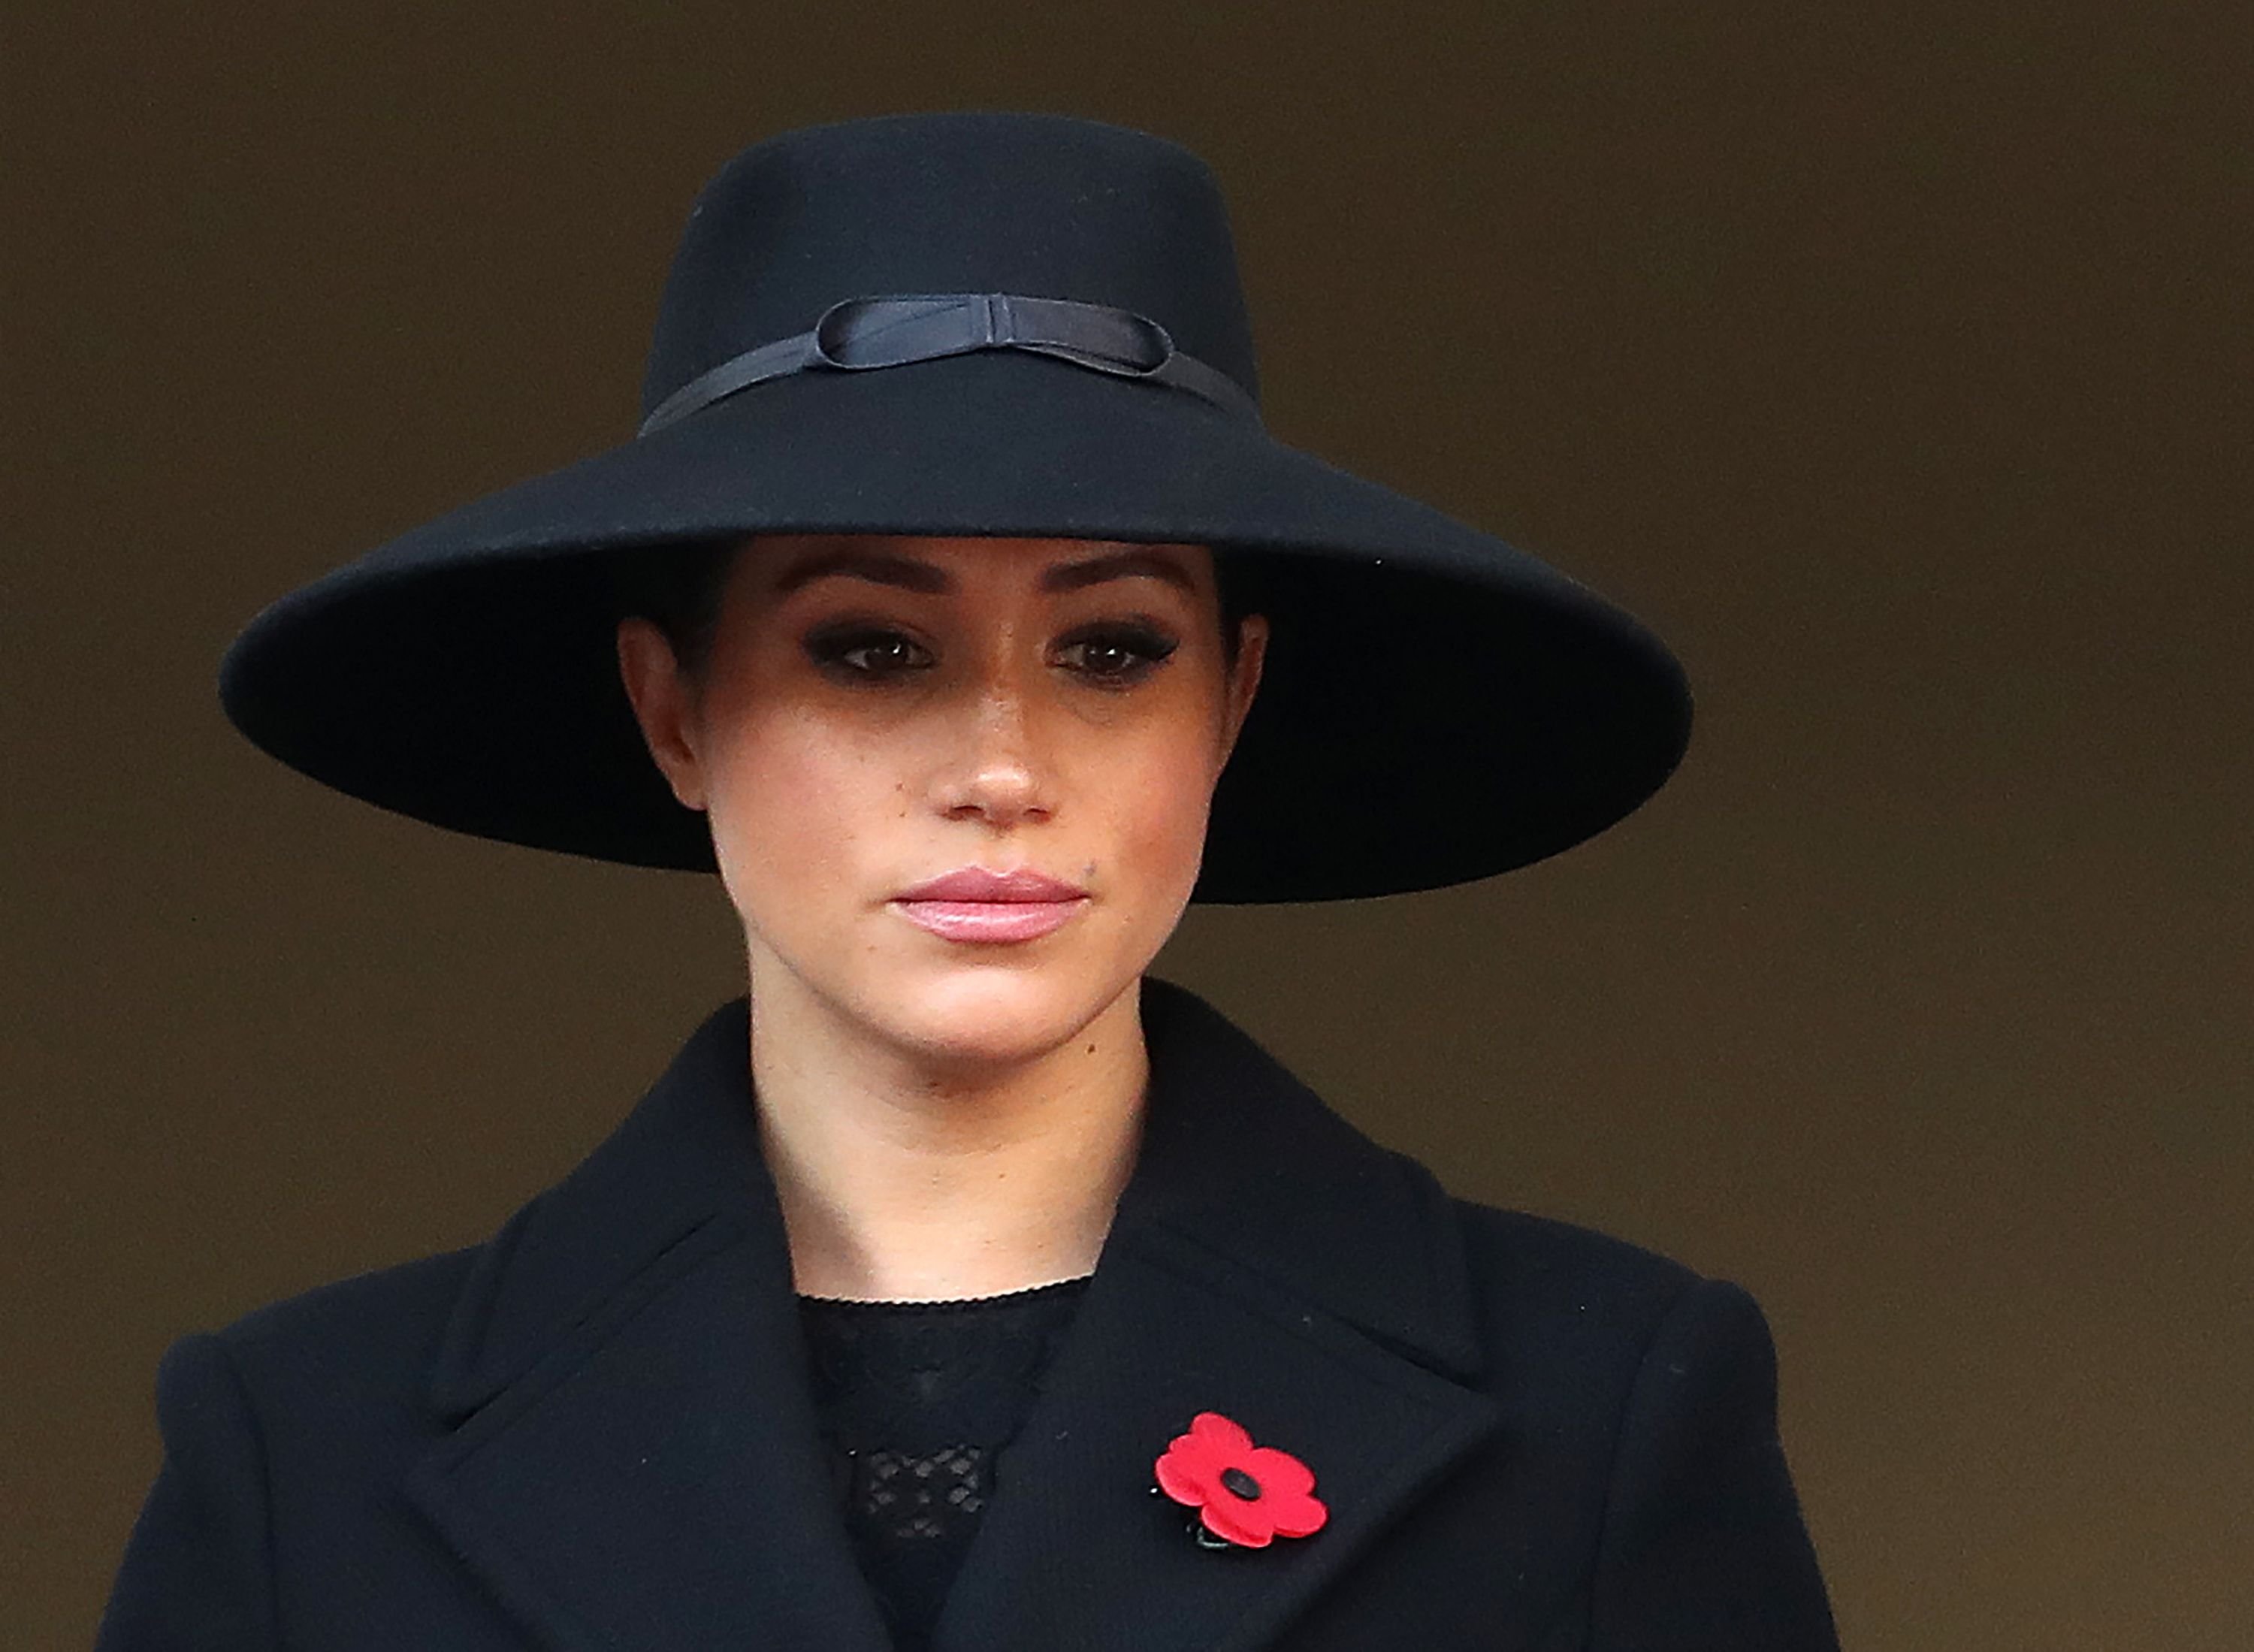 Meghan Markle during the annual Remembrance Sunday memorial at The Cenotaph on November 10, 2019 in London, England. | Source: Getty Images